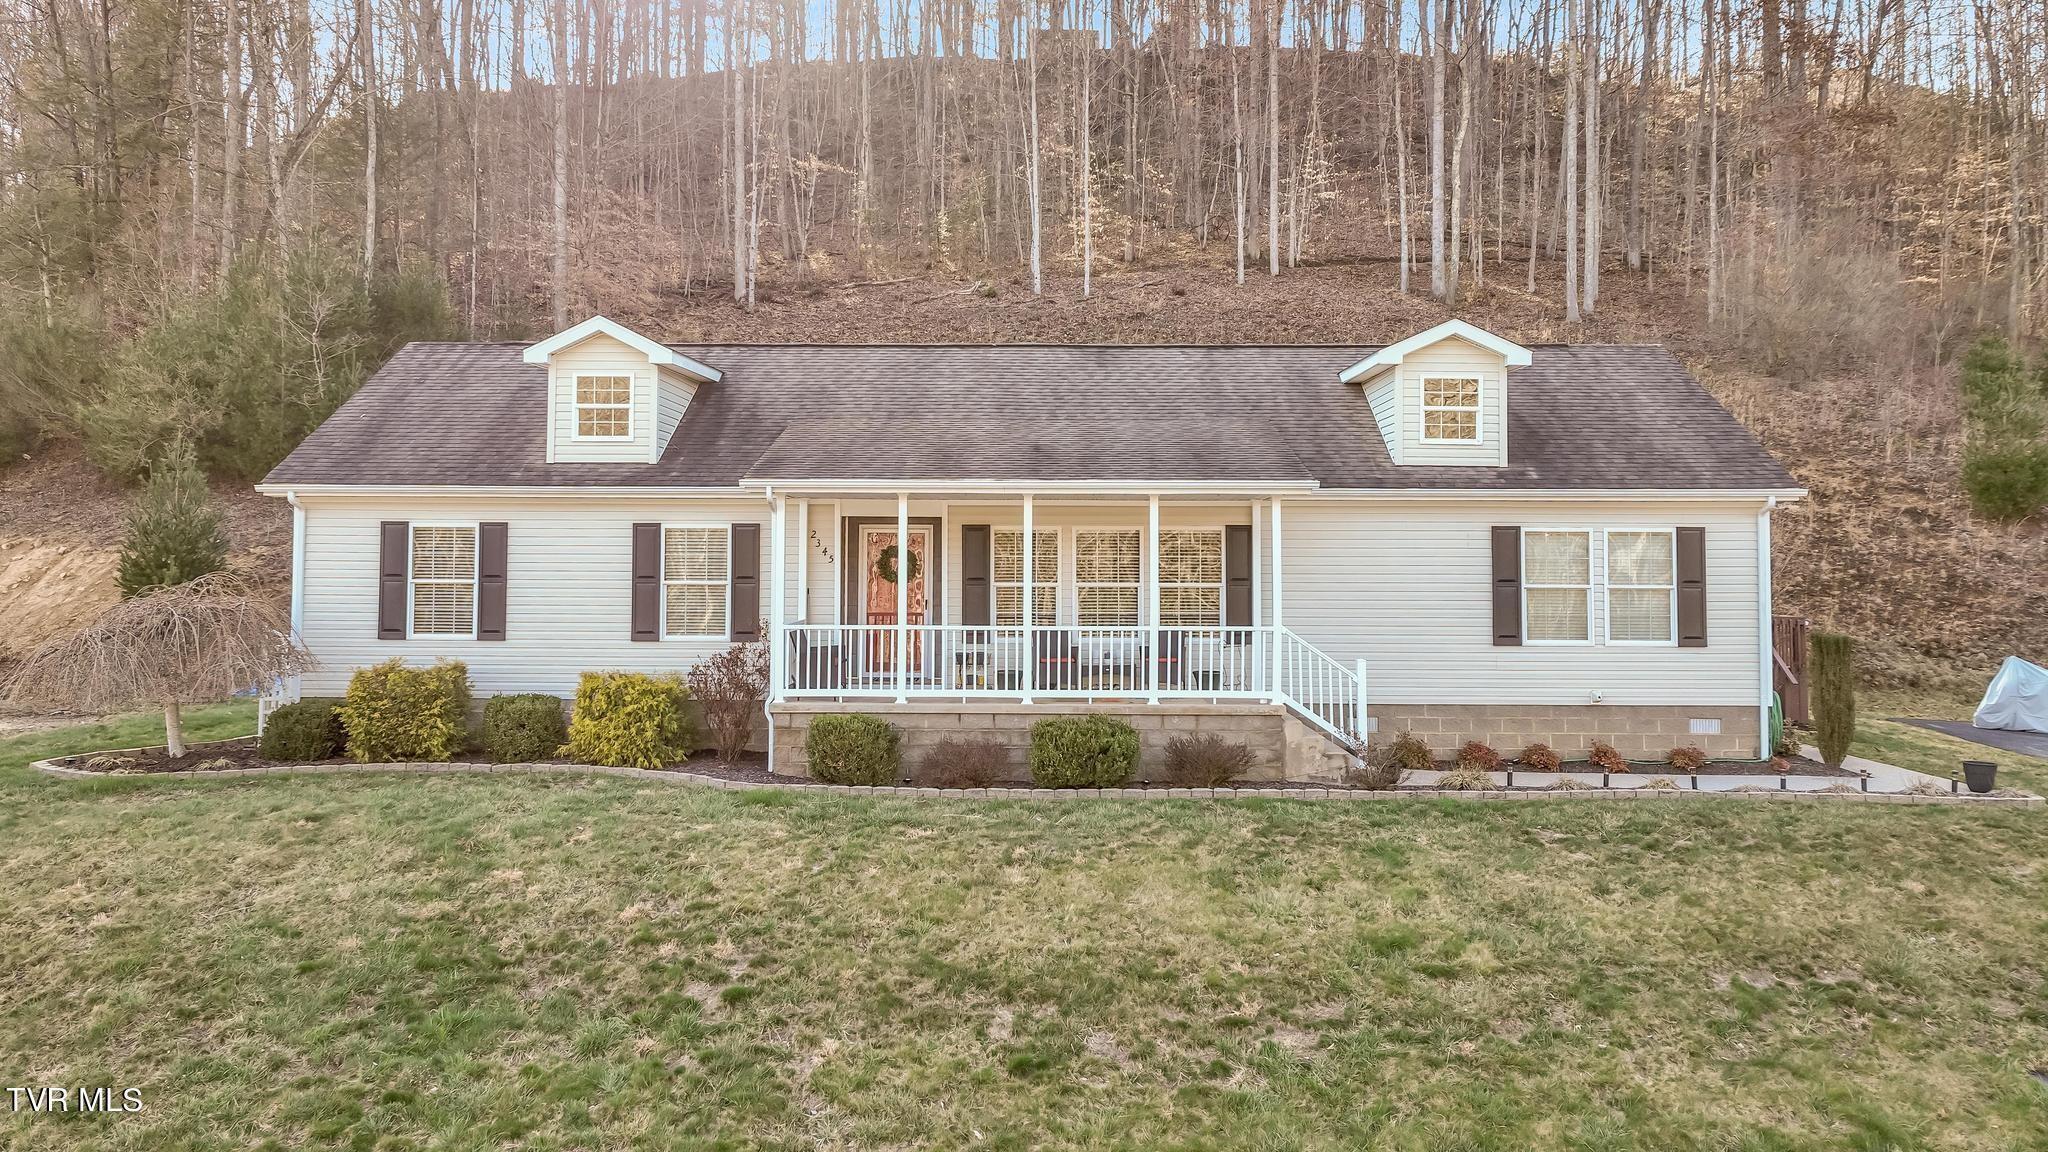 Property Image for 2345 Northeast Mountain Laurel Road